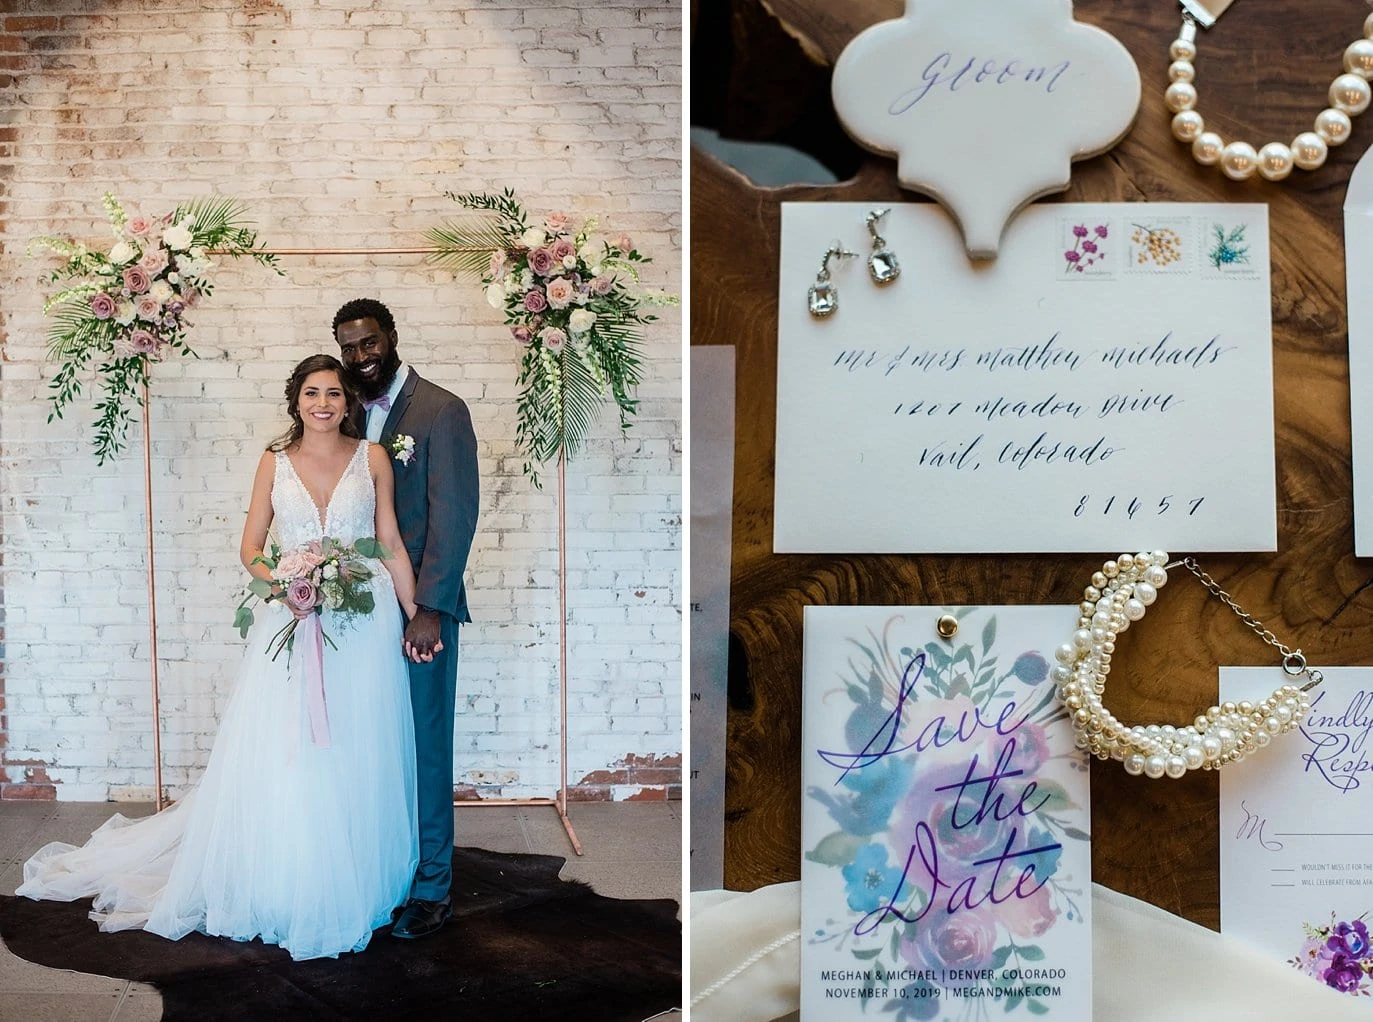 bride and groom by copper pipe ceremony arch with hides on ground plus water colored invitation set and wedding jewelry at Shyft Denver wedding by Lyons wedding photographer Jennie Crate